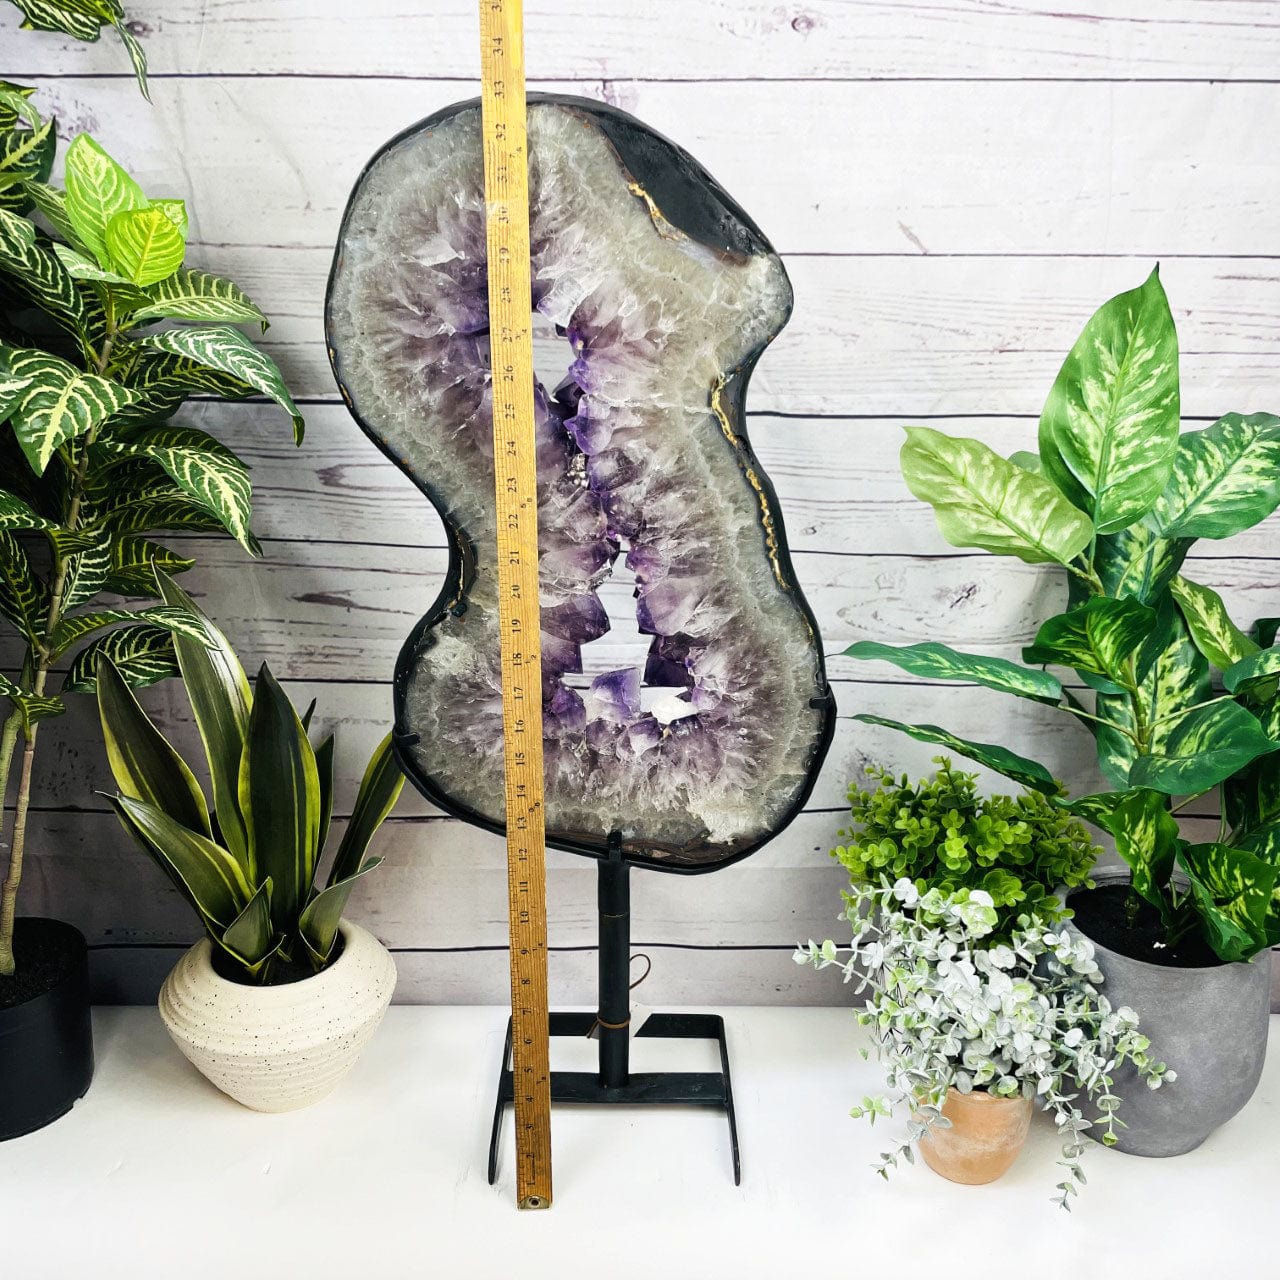 Amethyst Slice in shape of 8 on Metal Stand with a ruler